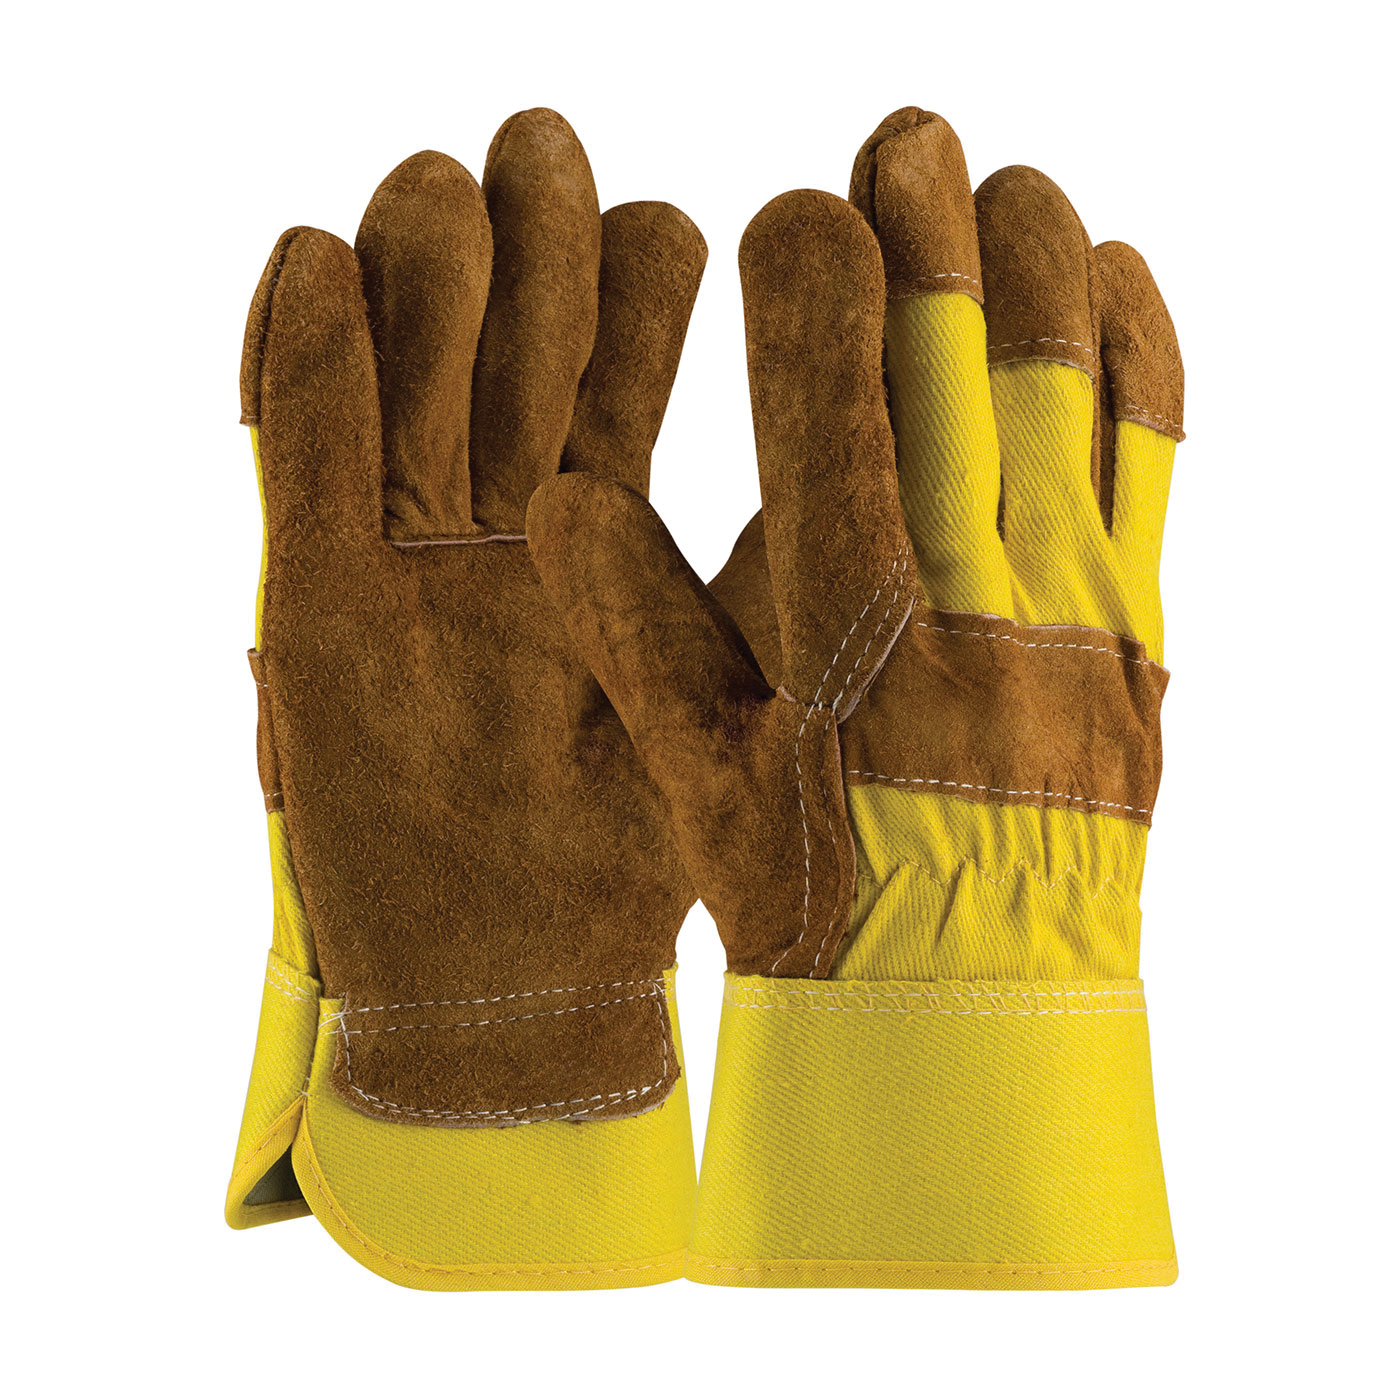 PIP® 85-7513P Economy Economy Grade Men's General Purpose Gloves, Leather Palm/Work, Gunn Cut/Full Finger/Wing Thumb Style, L, Shoulder Split Cowhide Leather Palm, Shoulder Split Cowhide Leather, Hi-Viz Yellow/Red, Rubberized Safety Cuff, Uncoated Coating